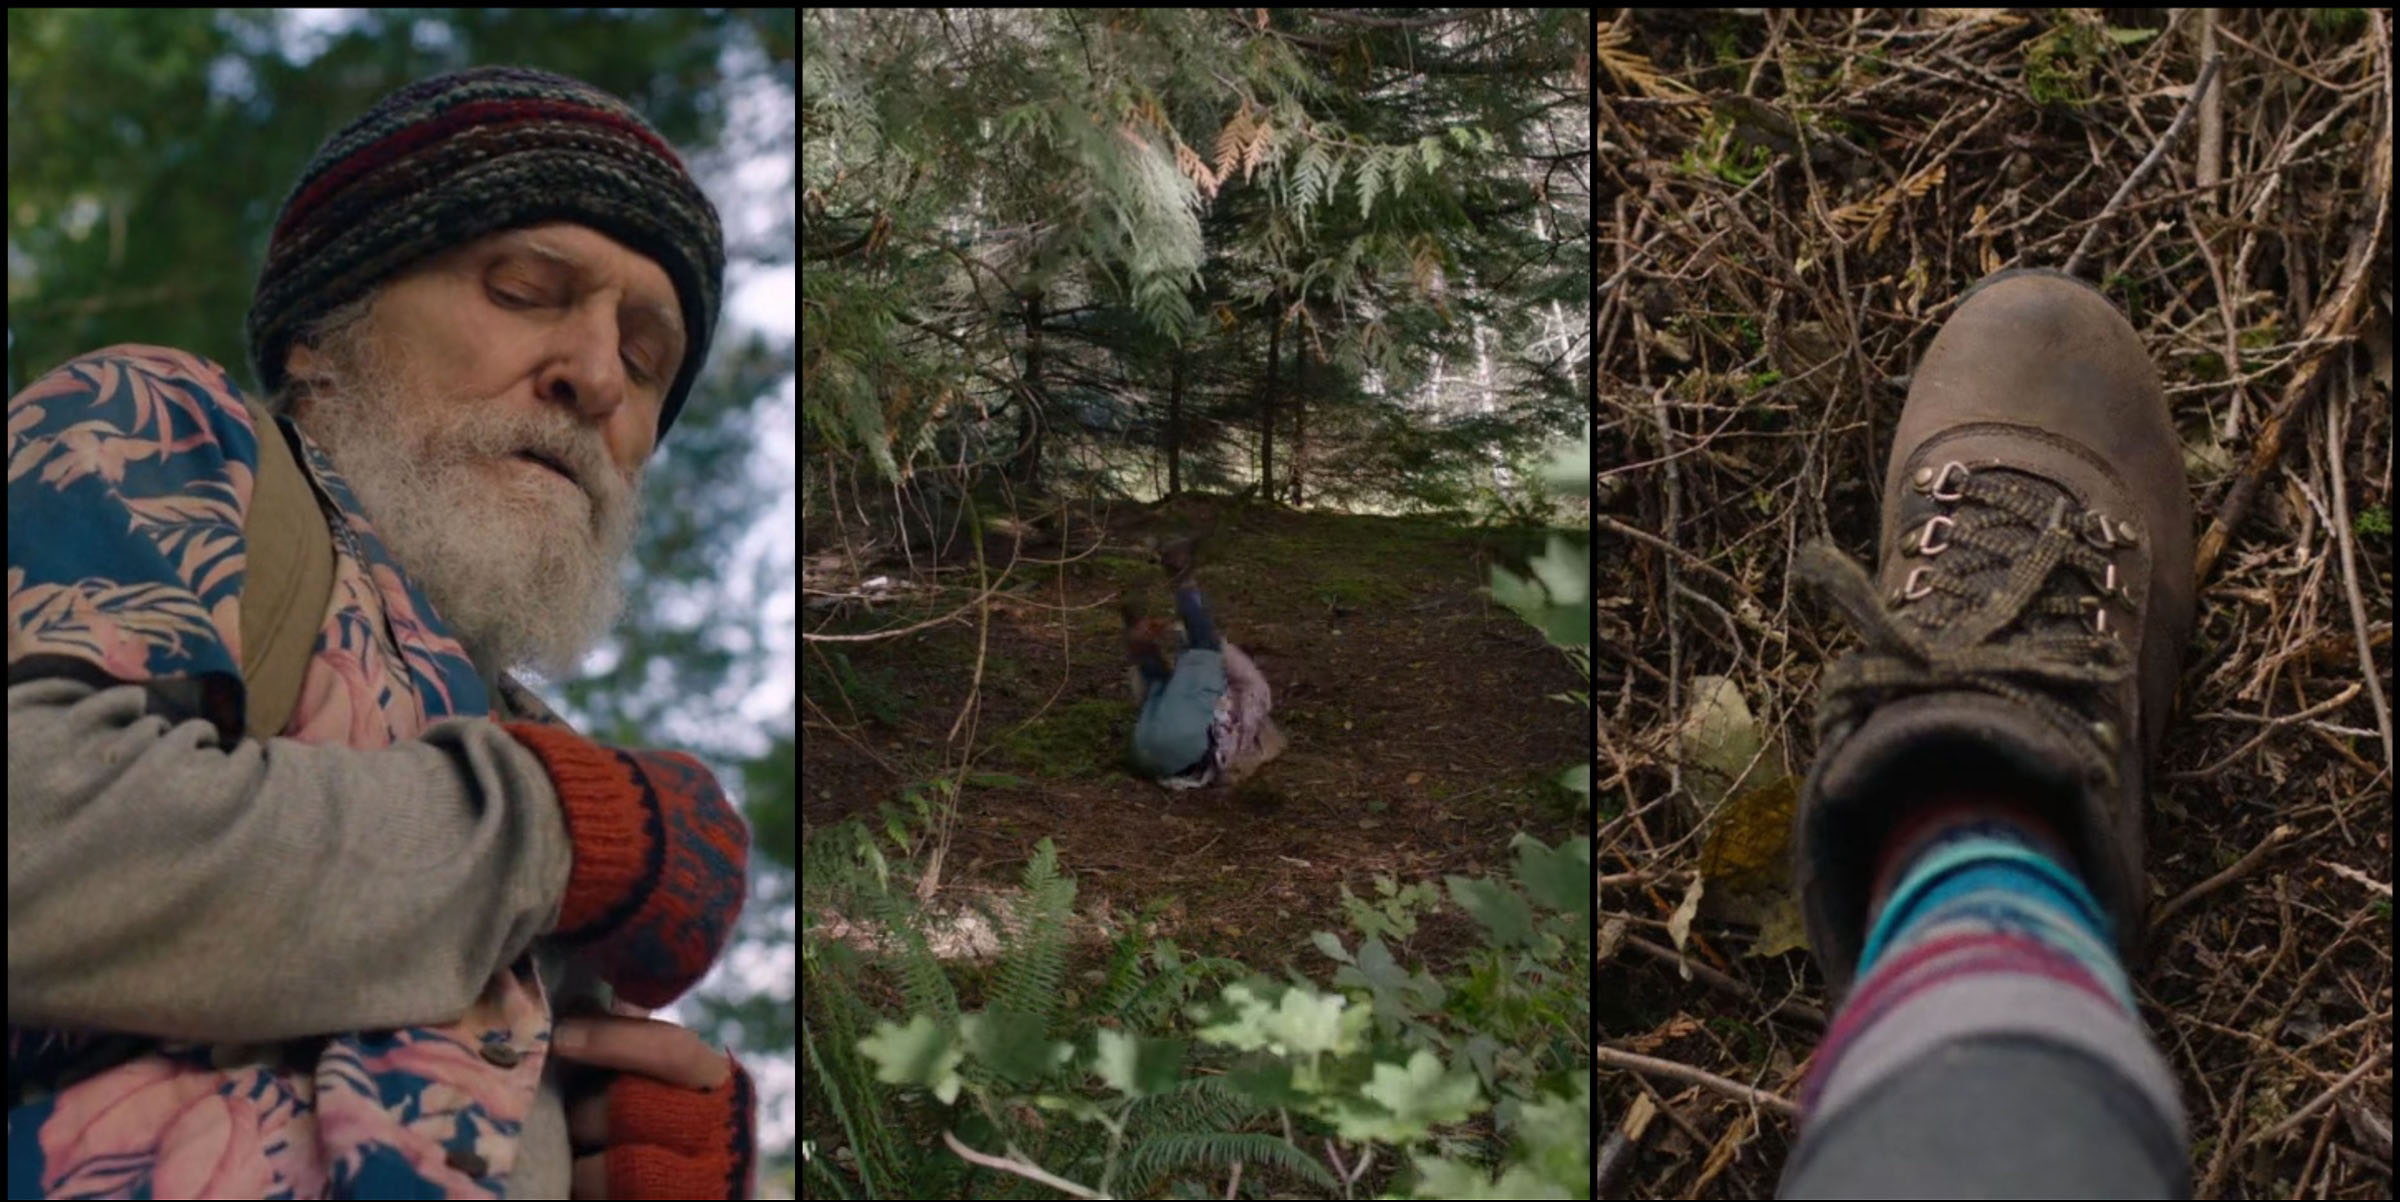 Collage of three images of Jerry Horne in the woods